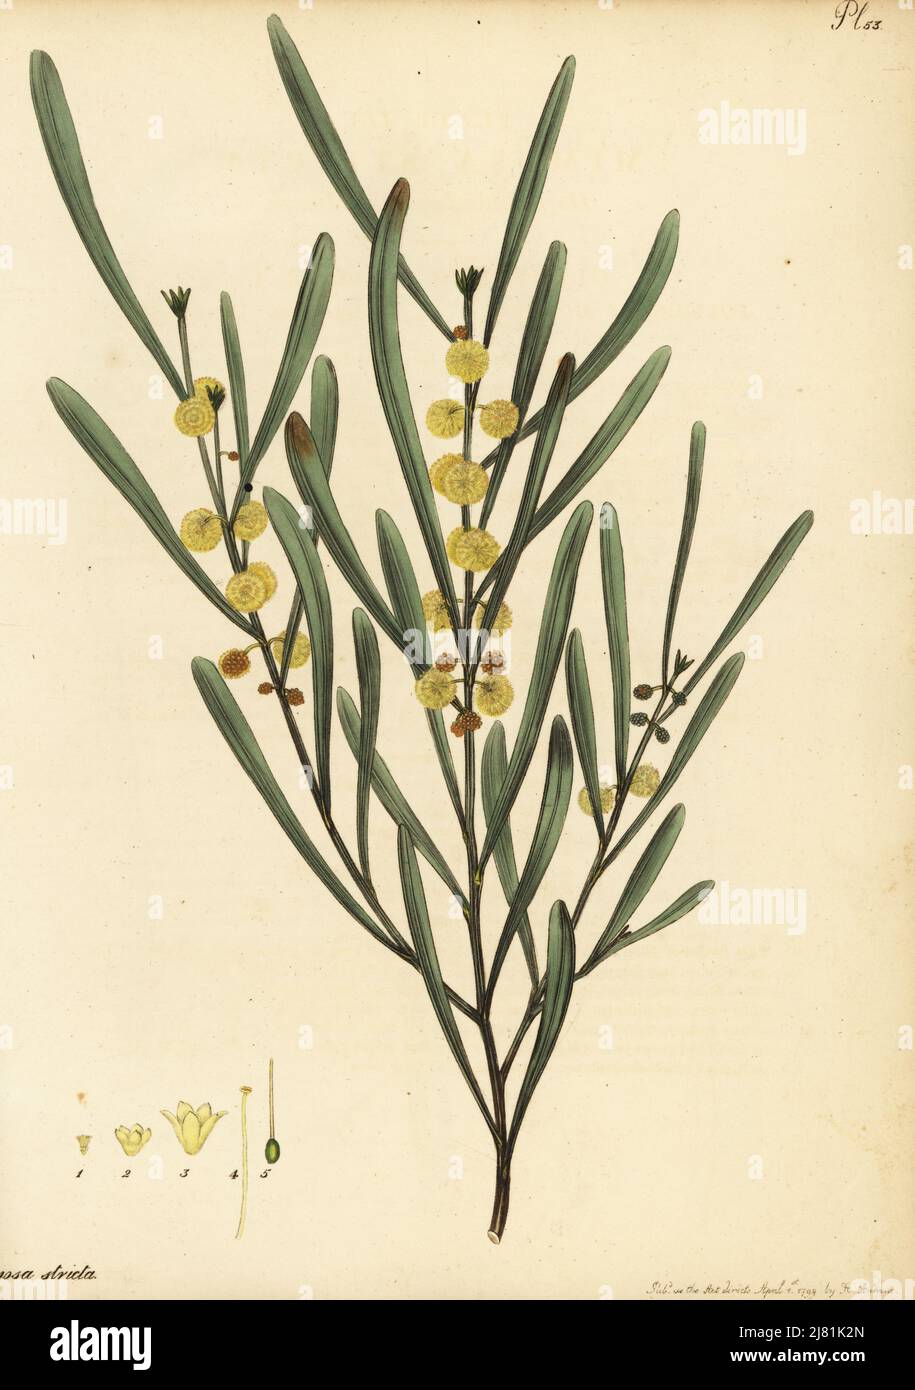 Hop wattle, Acacia stricta. New Holland, Australia. Harsh-leaved upright mimosa, Mimosa stricta. Copperplate engraving drawn, engraved and hand-coloured by Henry Andrews from his Botanical Register, Volume 1, published in London, 1799. Stock Photo